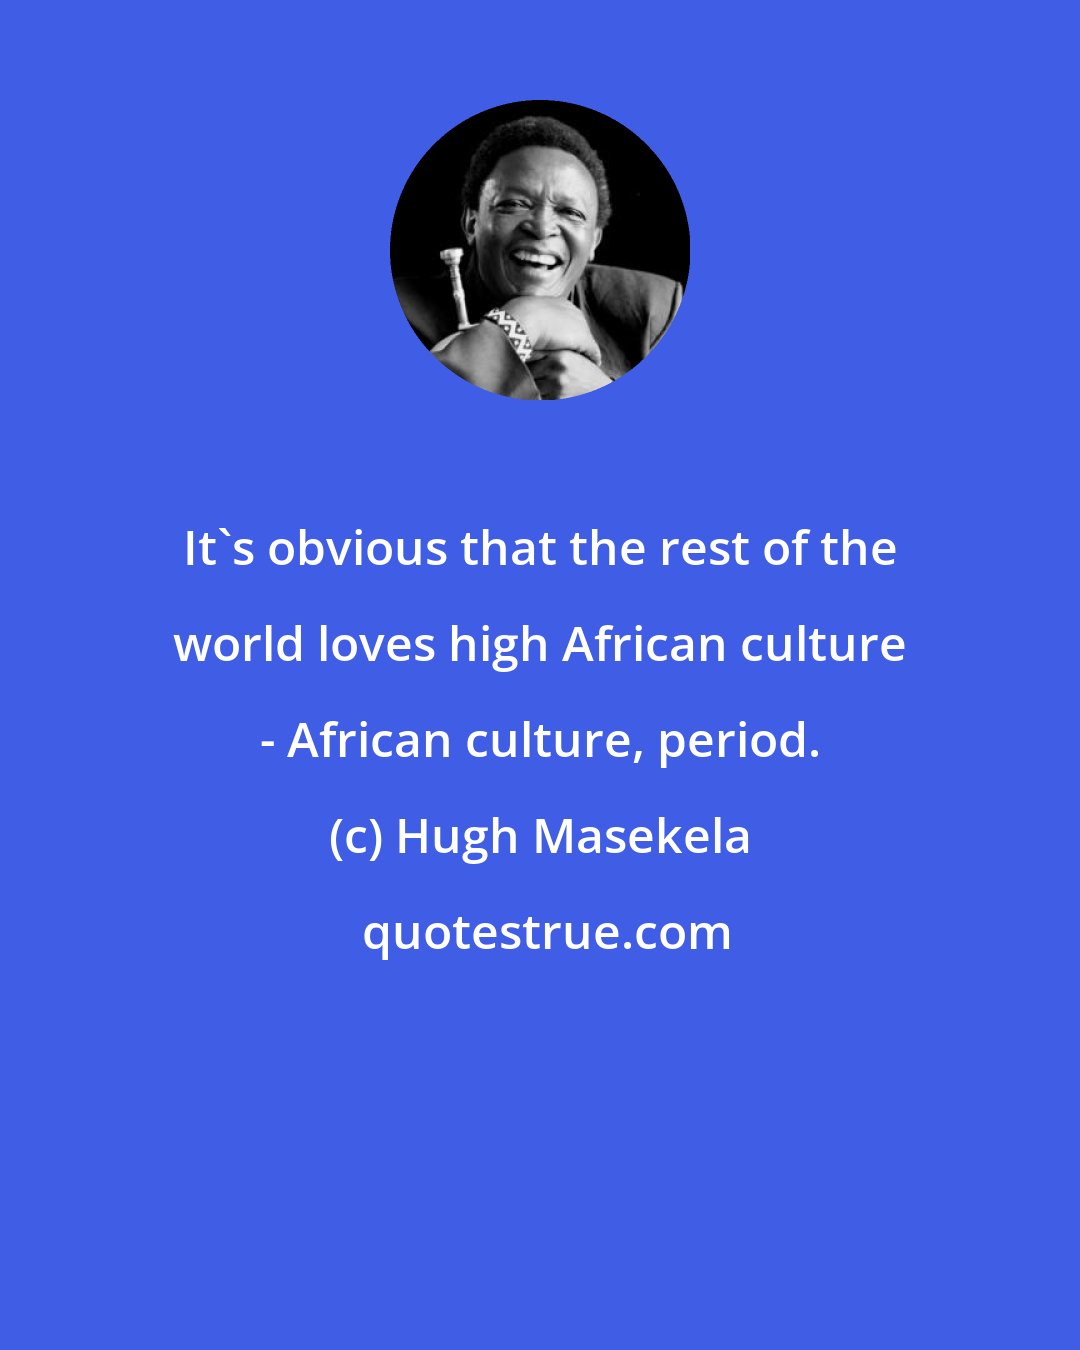 Hugh Masekela: It's obvious that the rest of the world loves high African culture - African culture, period.